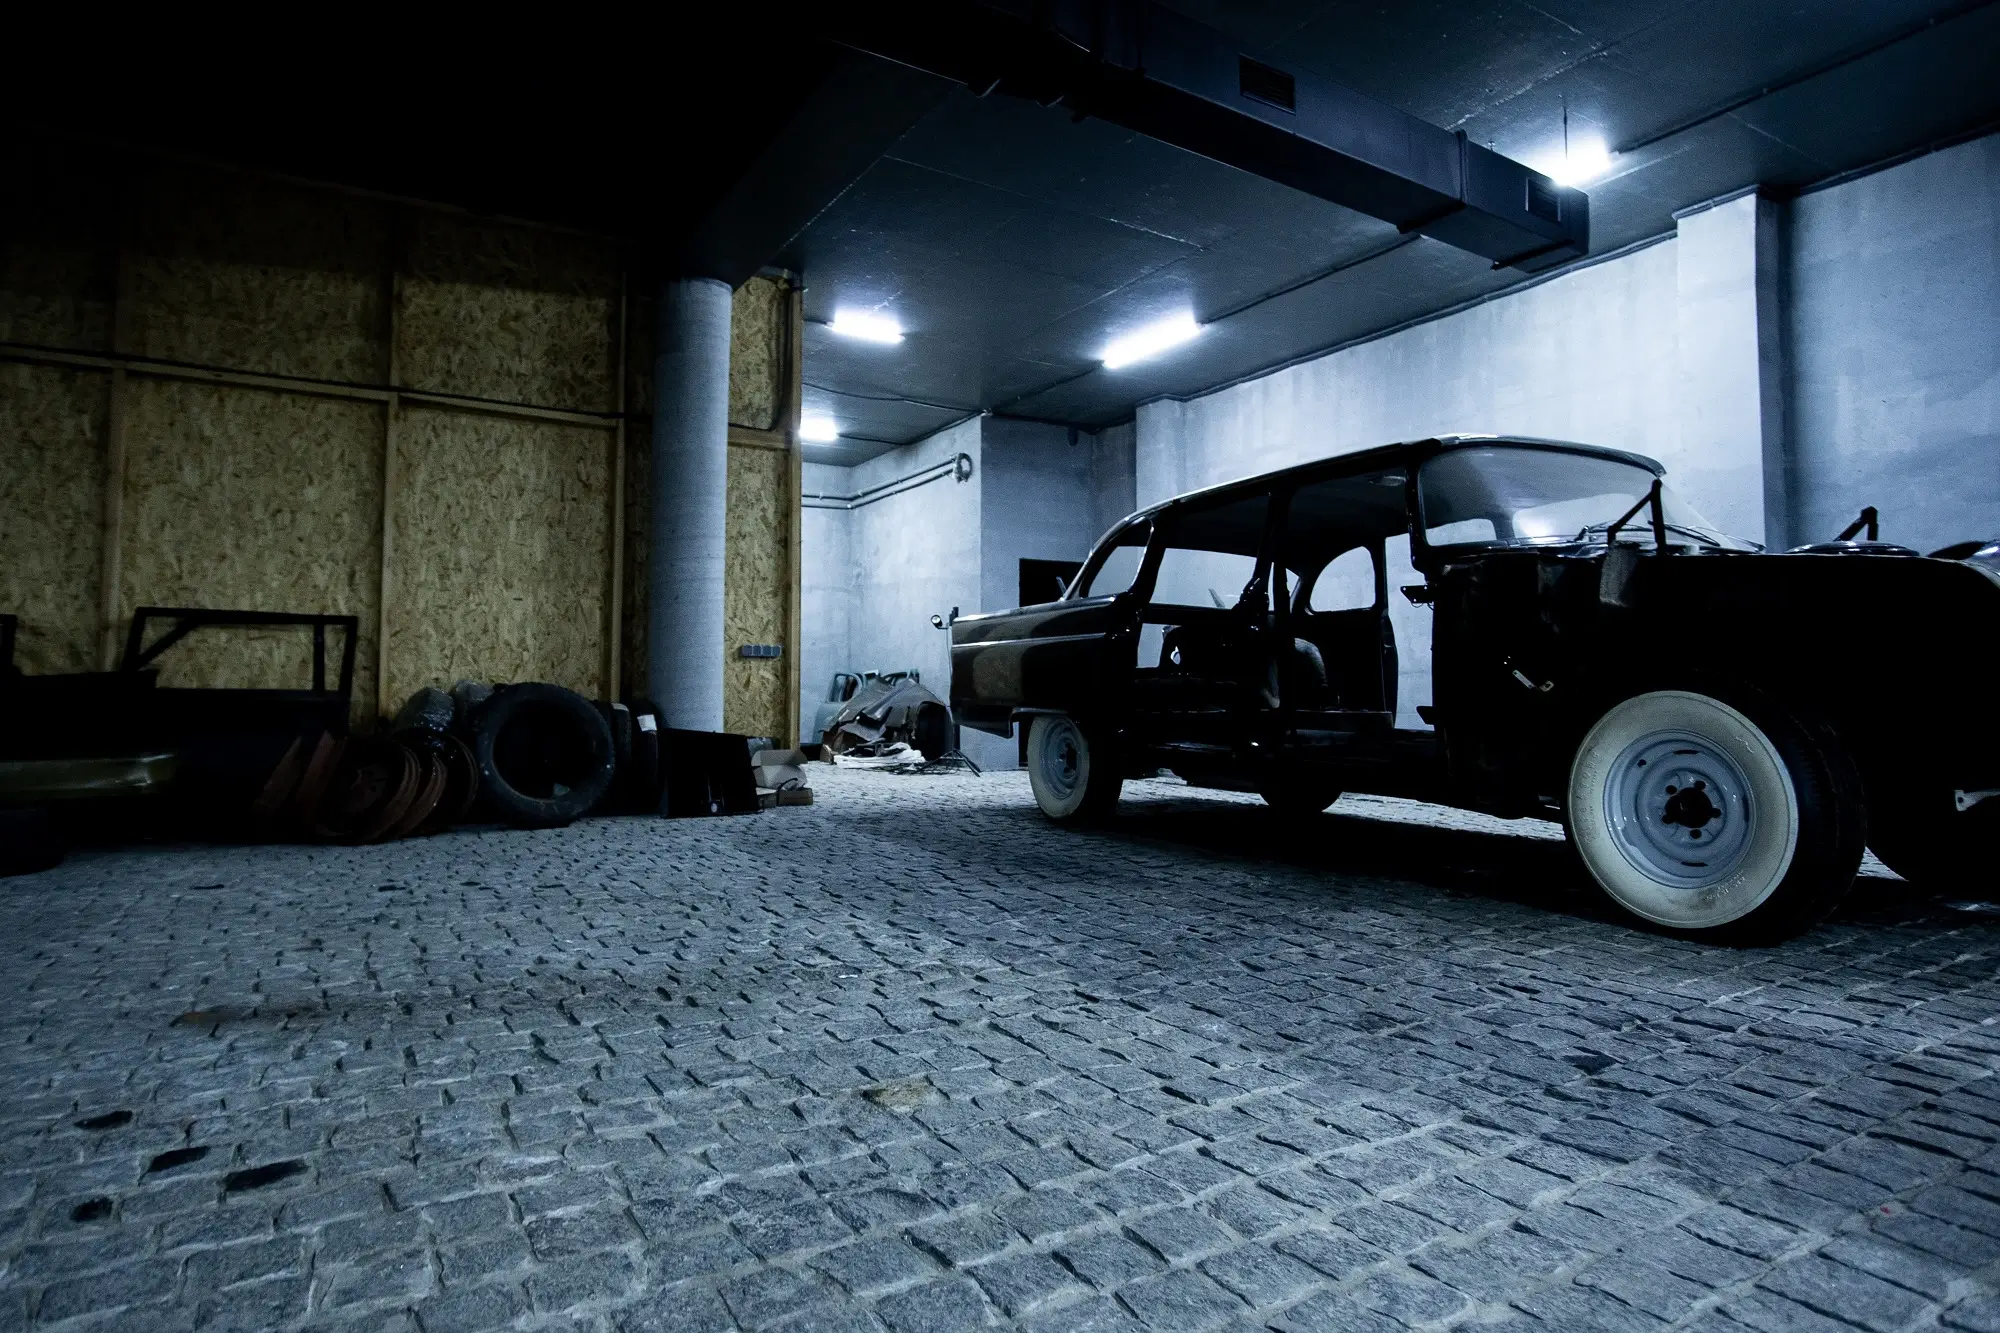 A black vintage pickup truck in the garage, representing the concept of GST and cars.